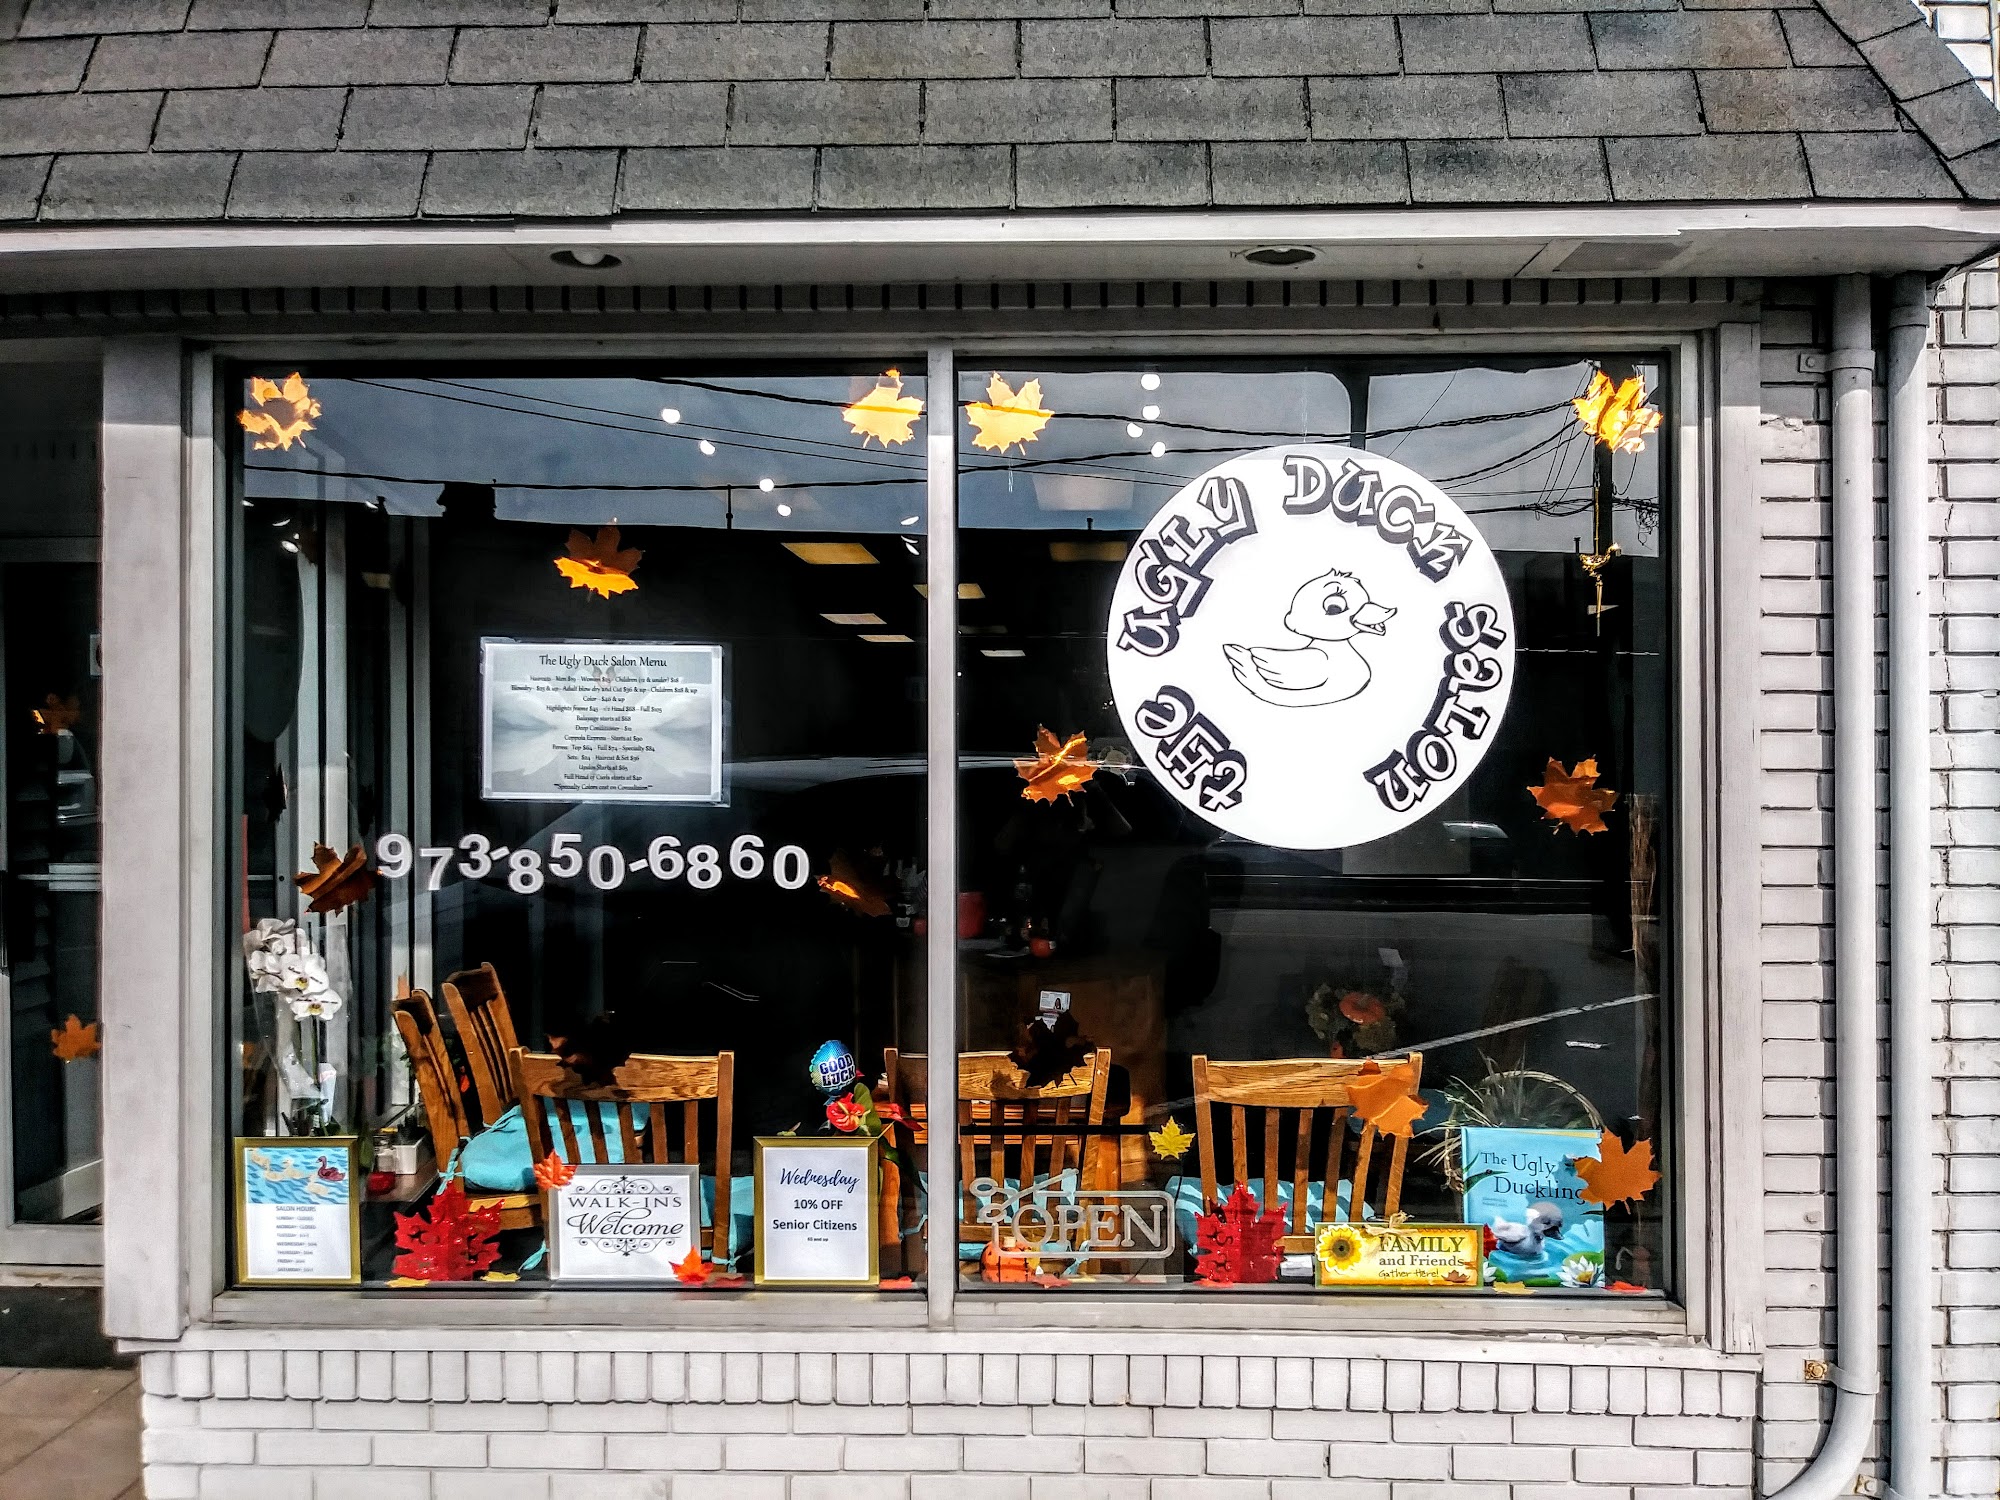 The Ugly Duck Salon